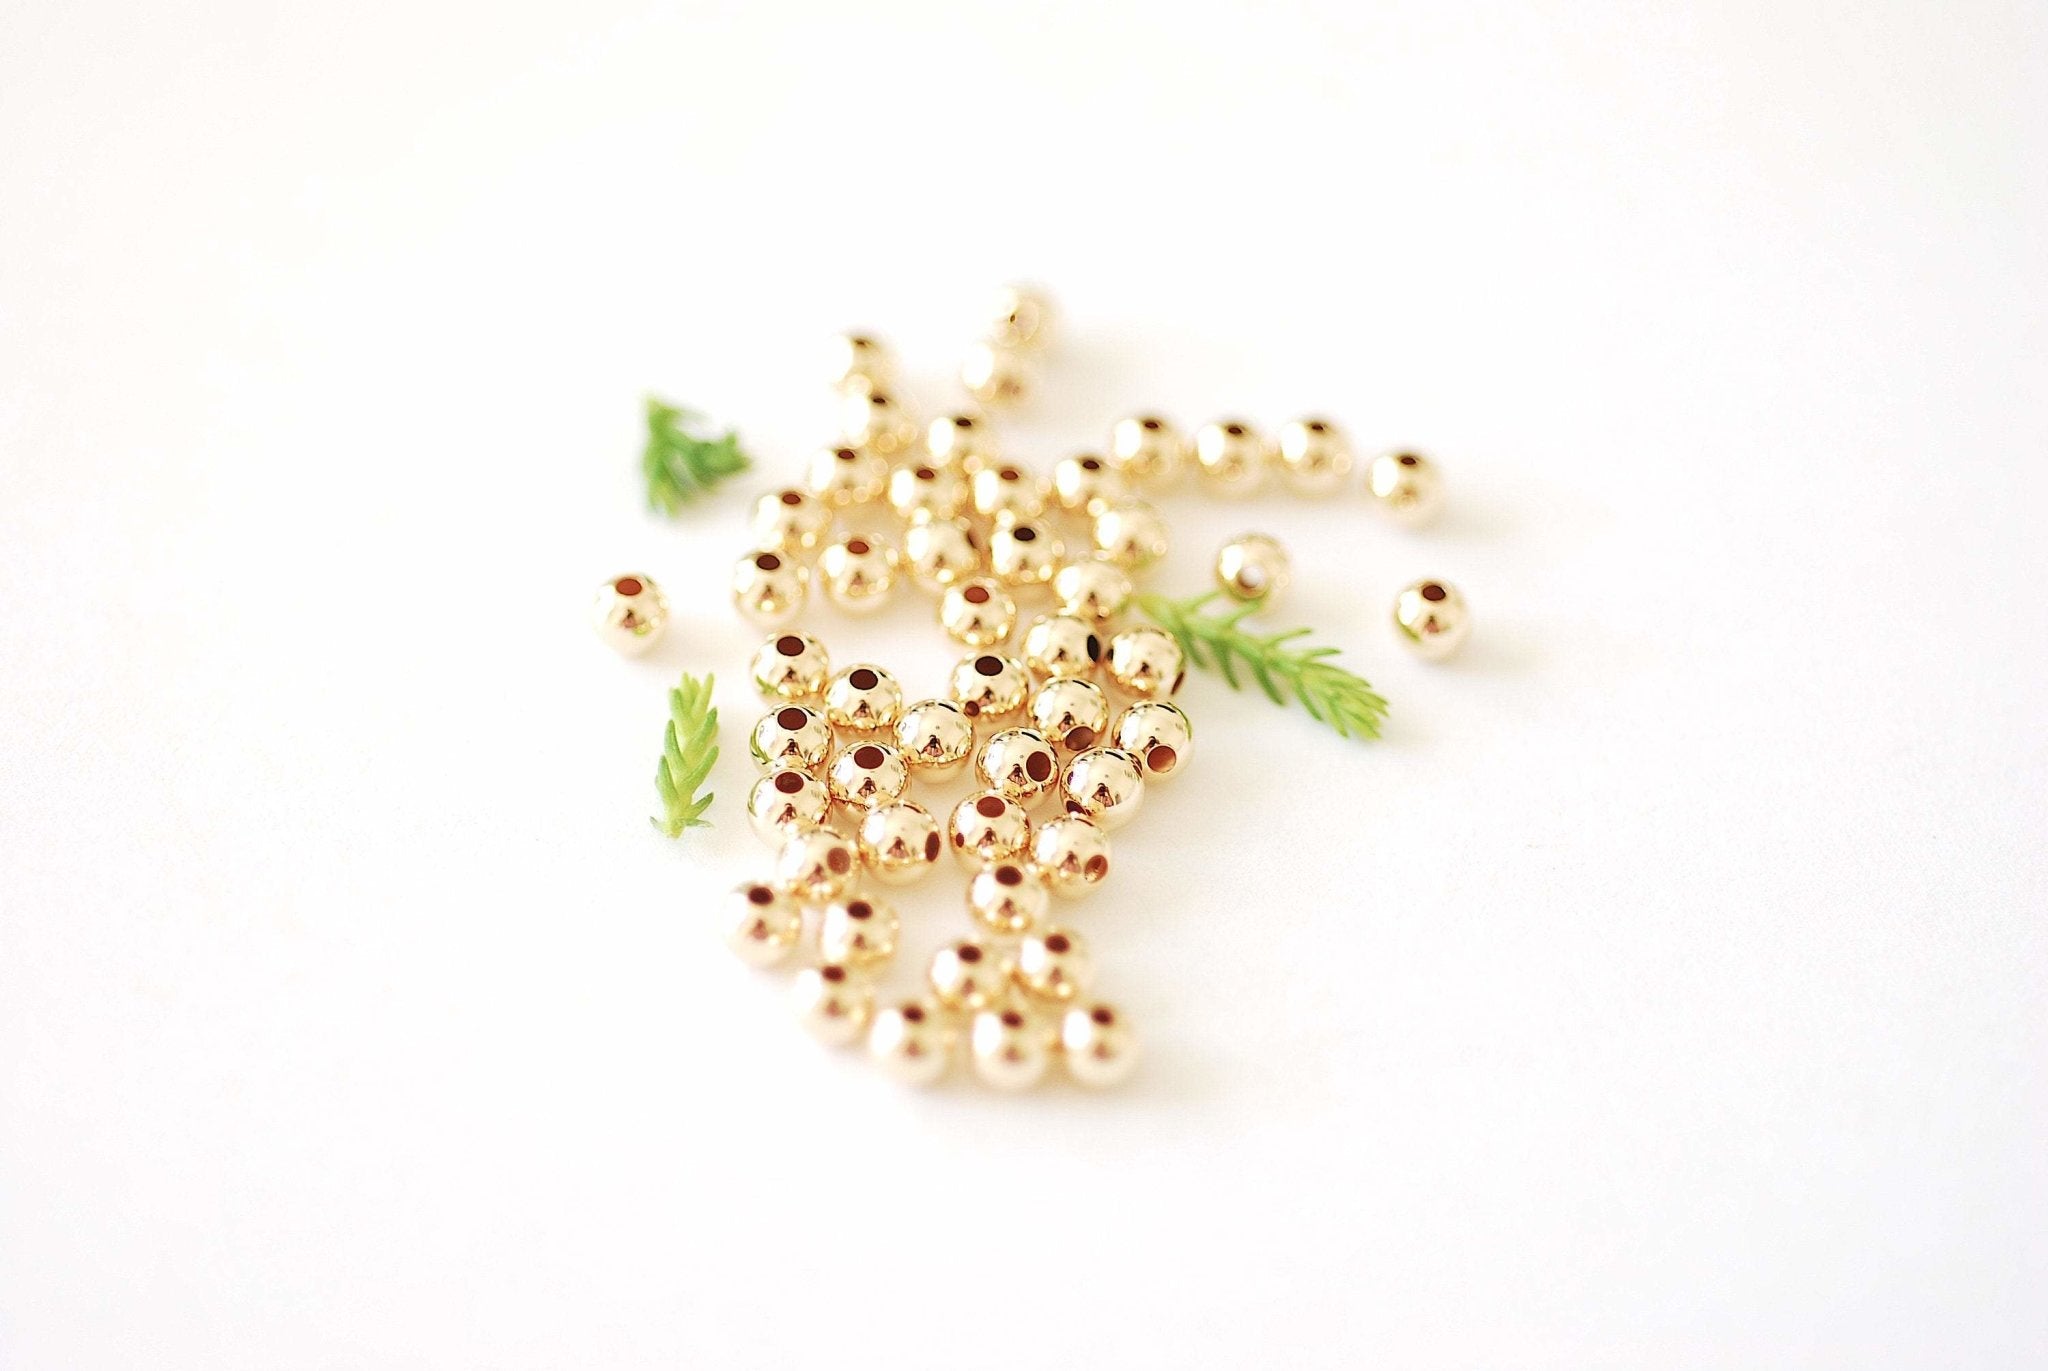 2.5mm Bead Gold-Filled 1.5mm Hole, (10 Pack) Wholesale Jewelry Making Beads - HarperCrown